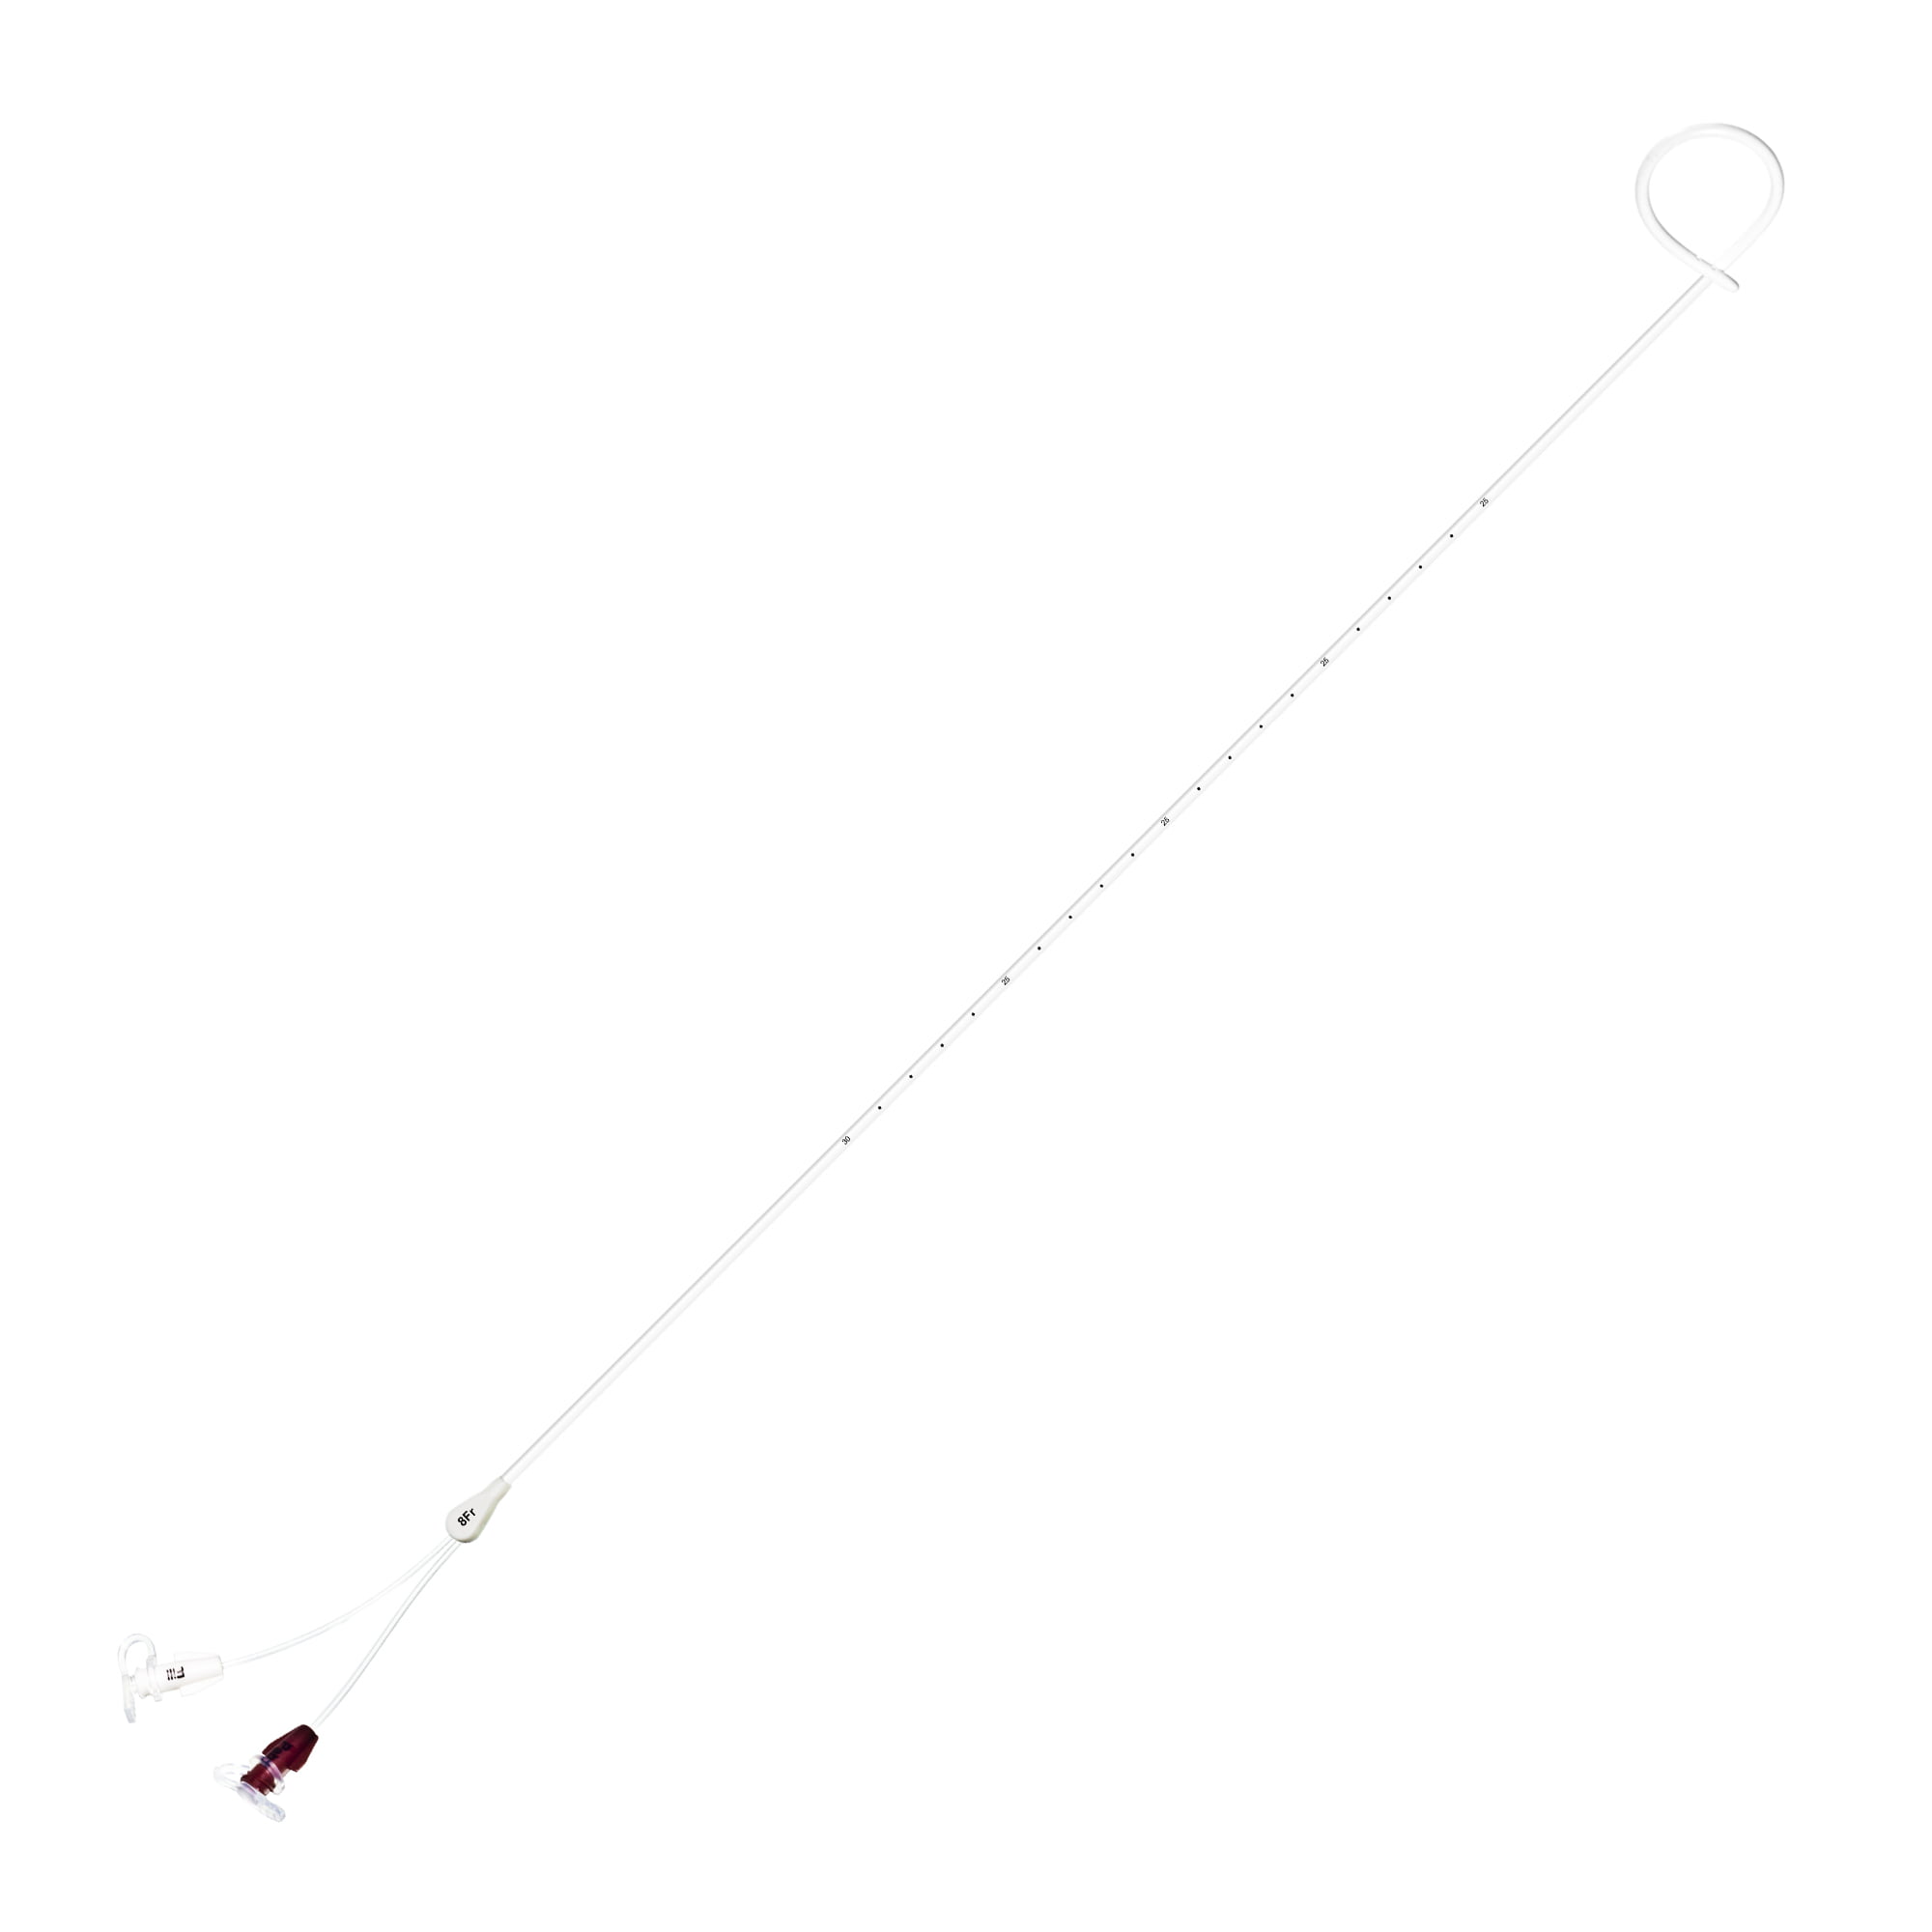 double lumen cystometry catheter with pigtai;